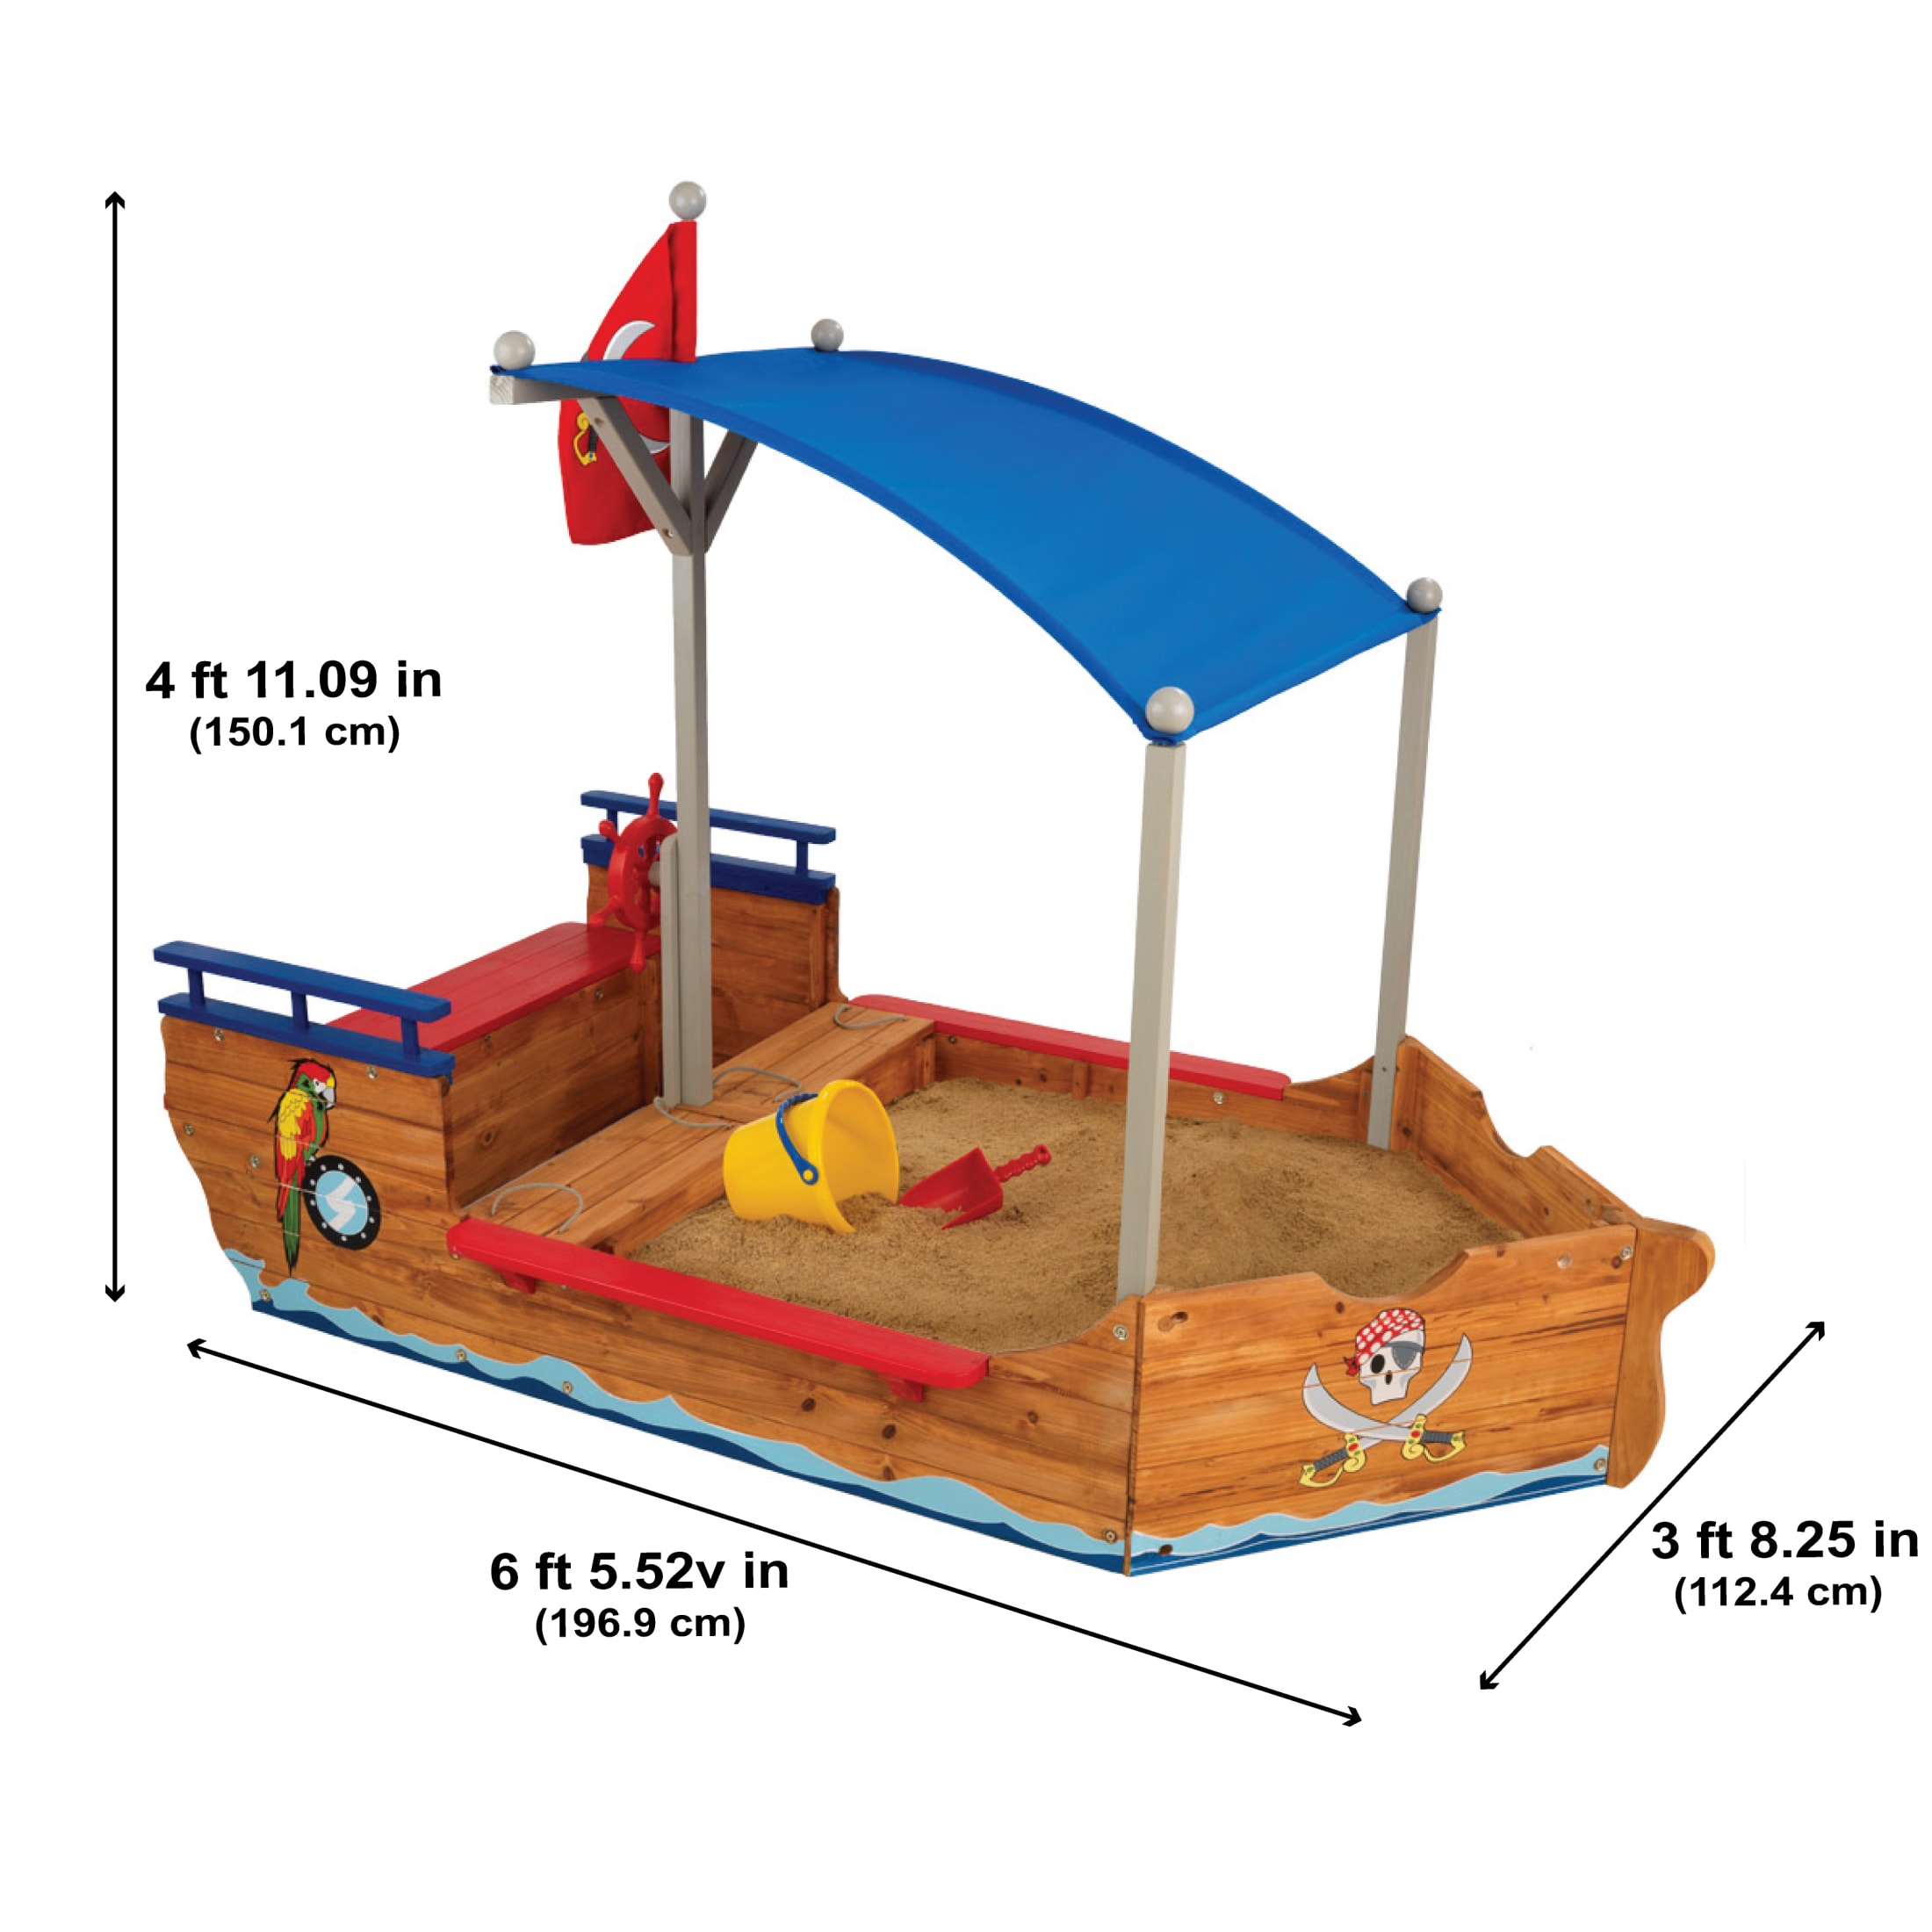 KidKraft Wooden Pirate Sandbox with Canopy, Covered Kid's Sandbox, Blue & Red - image 5 of 5